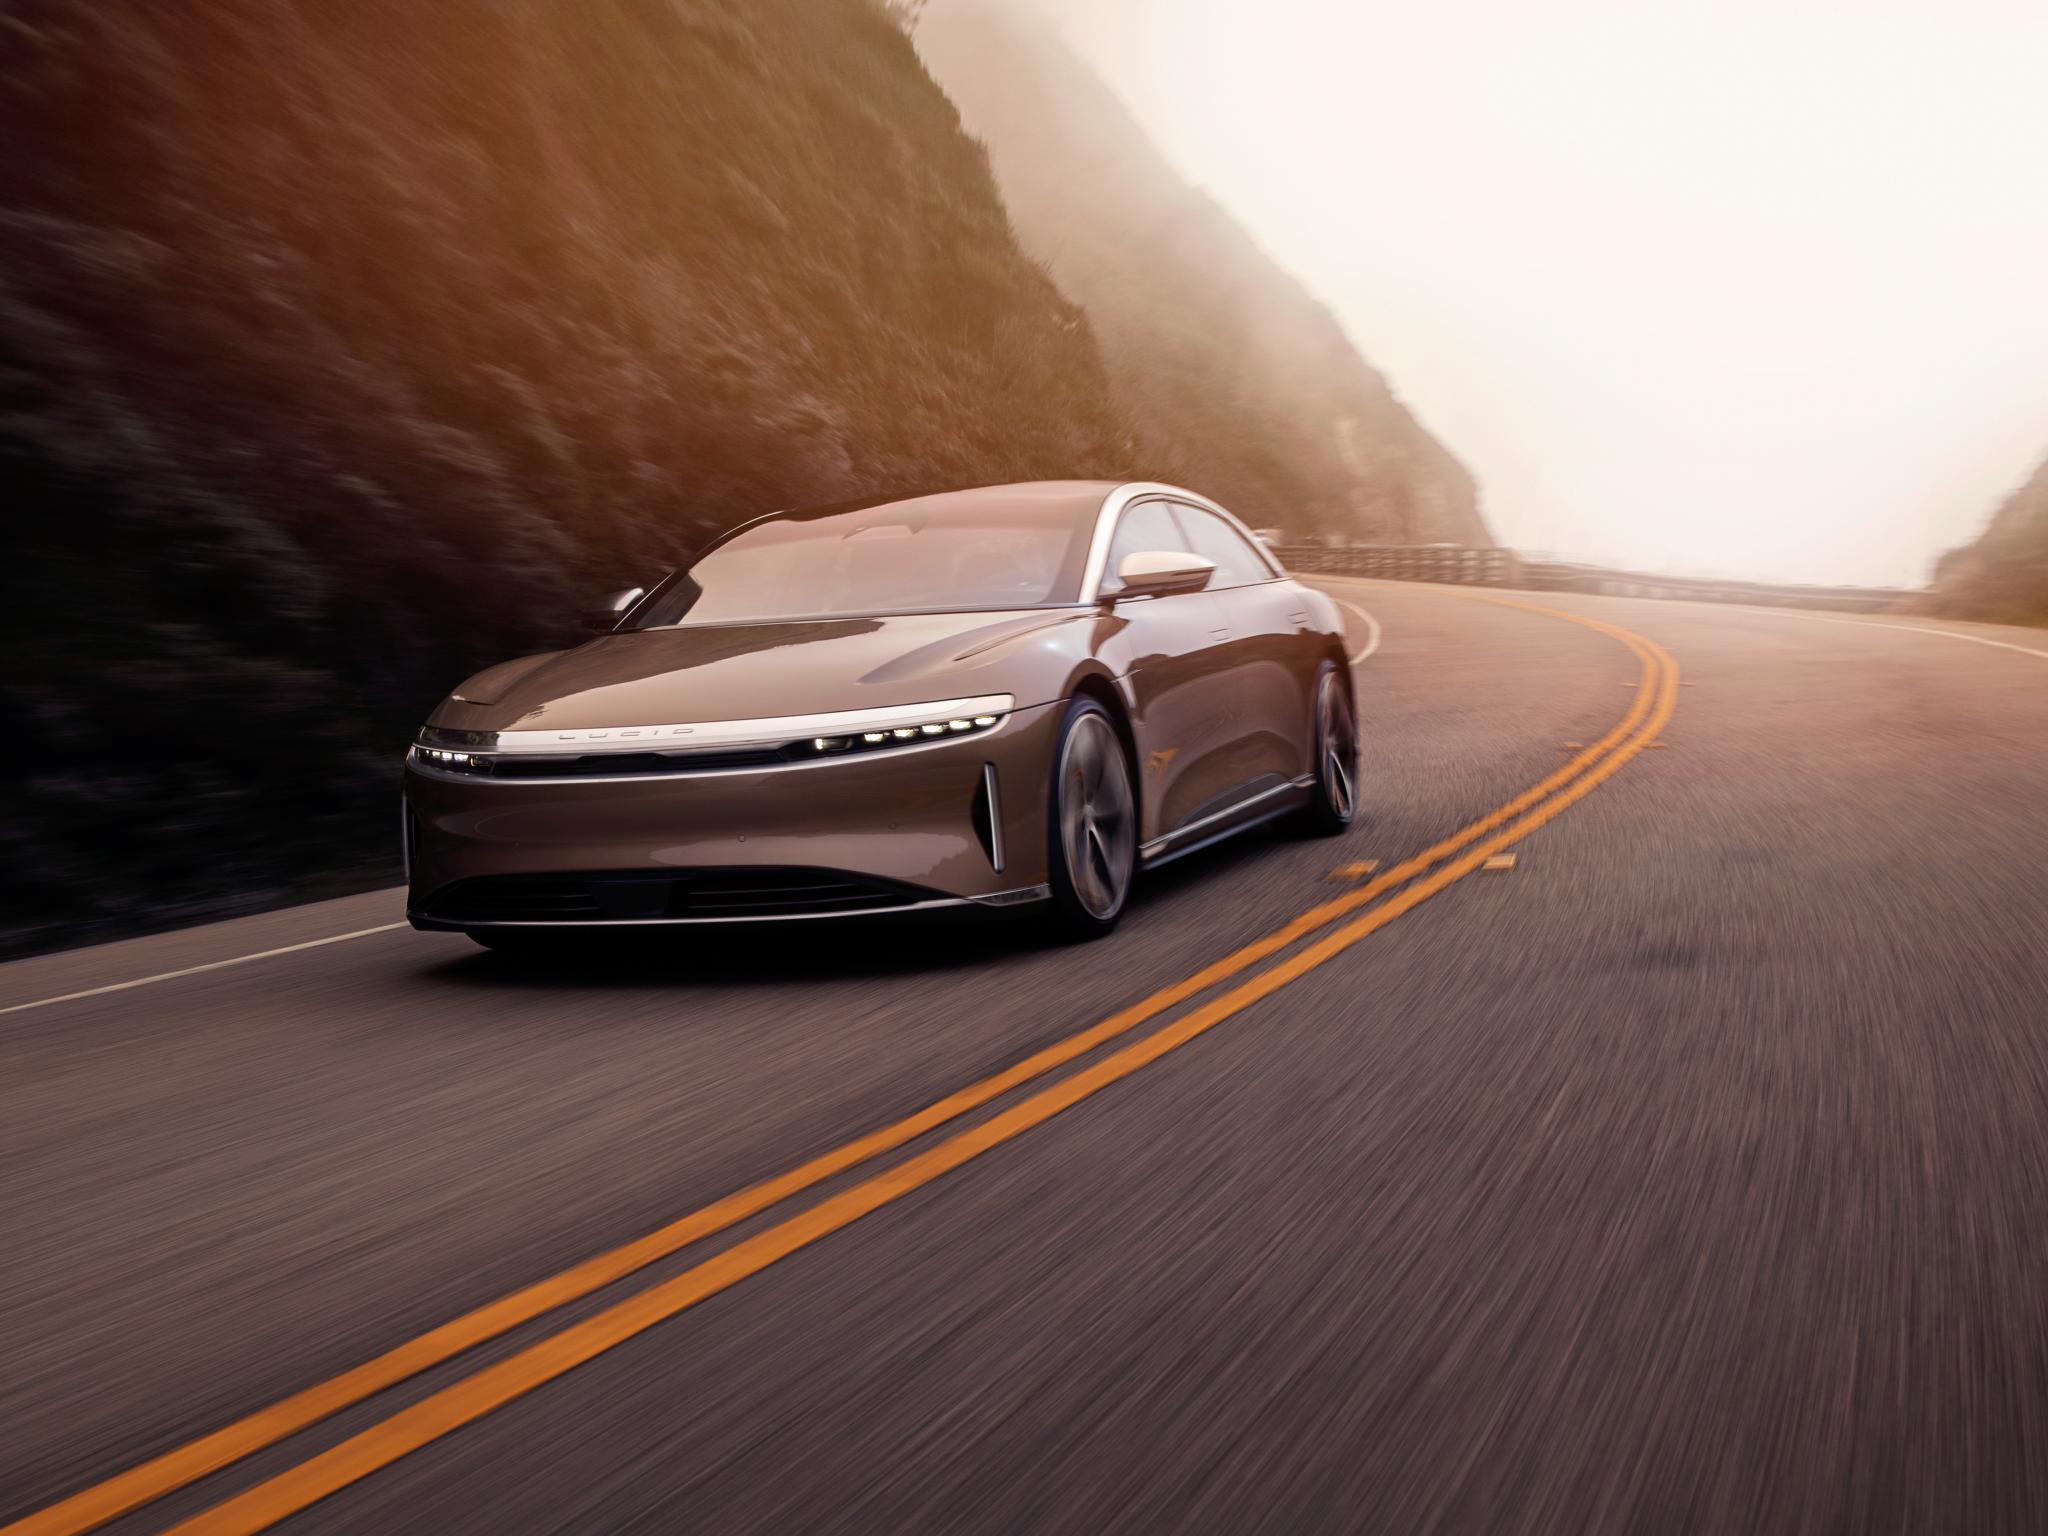  tesla-rival-lucid-groups-debut-vehicle-named-motortrend-car-of-the-year 